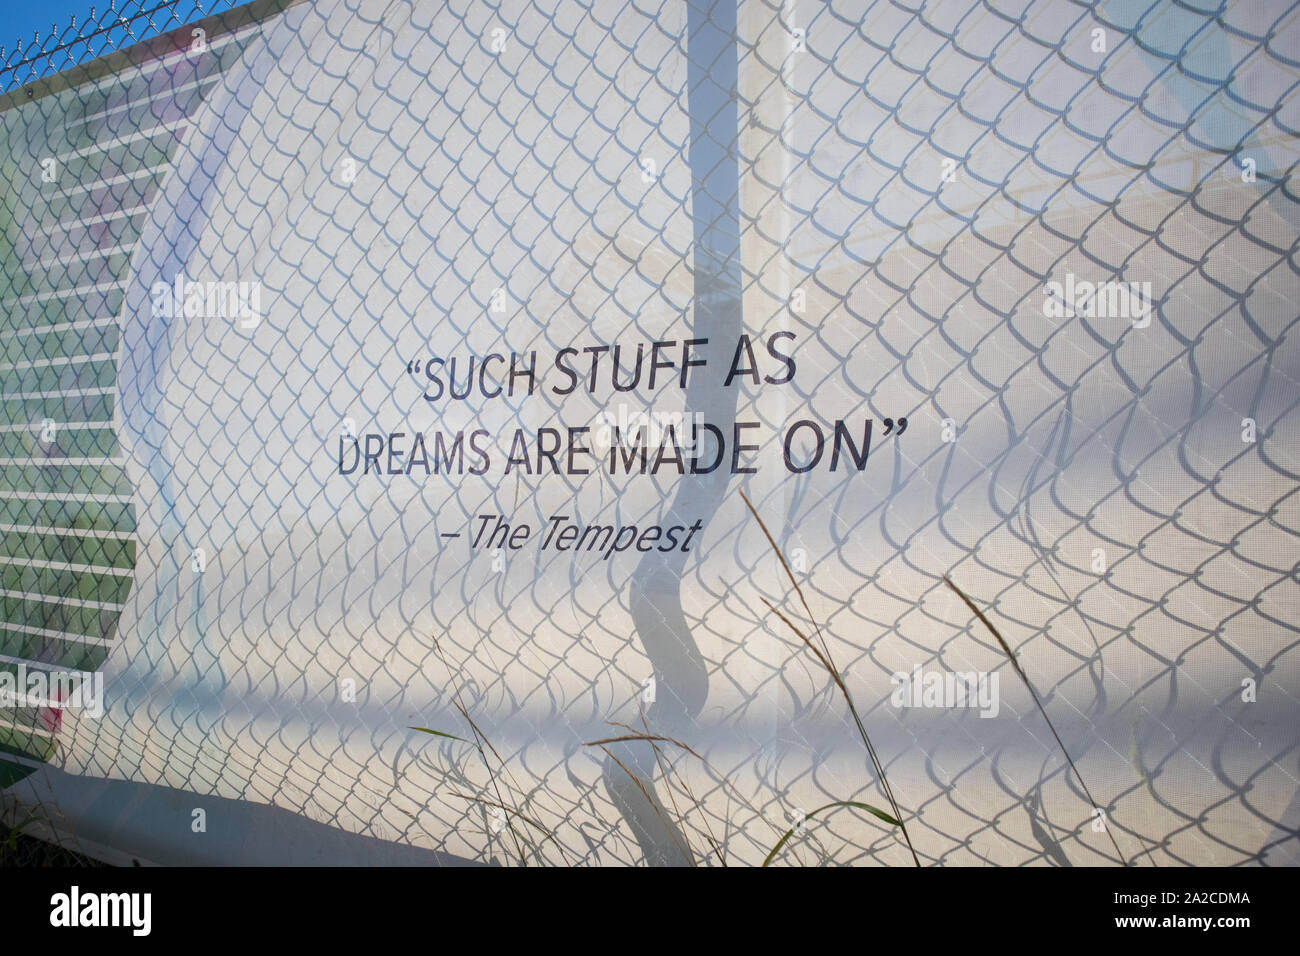 Fences hiding the site of the Tom Patterson new theater. The quote 'Such stuff as dreams are made on' is from Shakespeare's The Tempest Act 4. Stock Photo